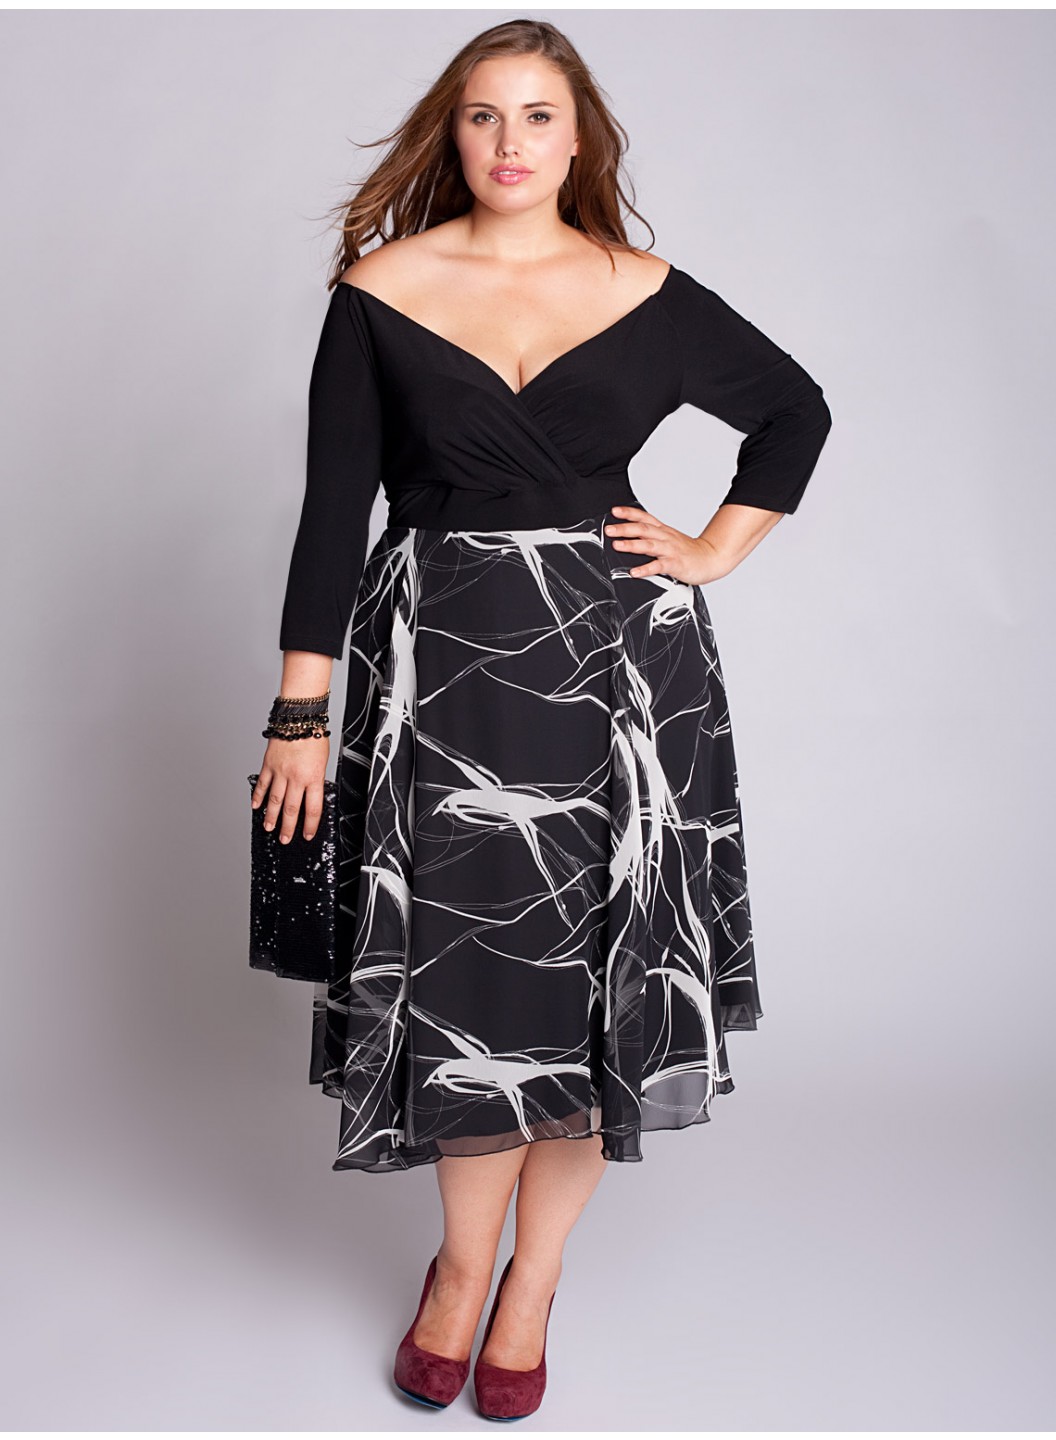 Plus Size Formal Dresses Dressed Up Girl inside Formal Wear For Plus Size Ladies for Motivate